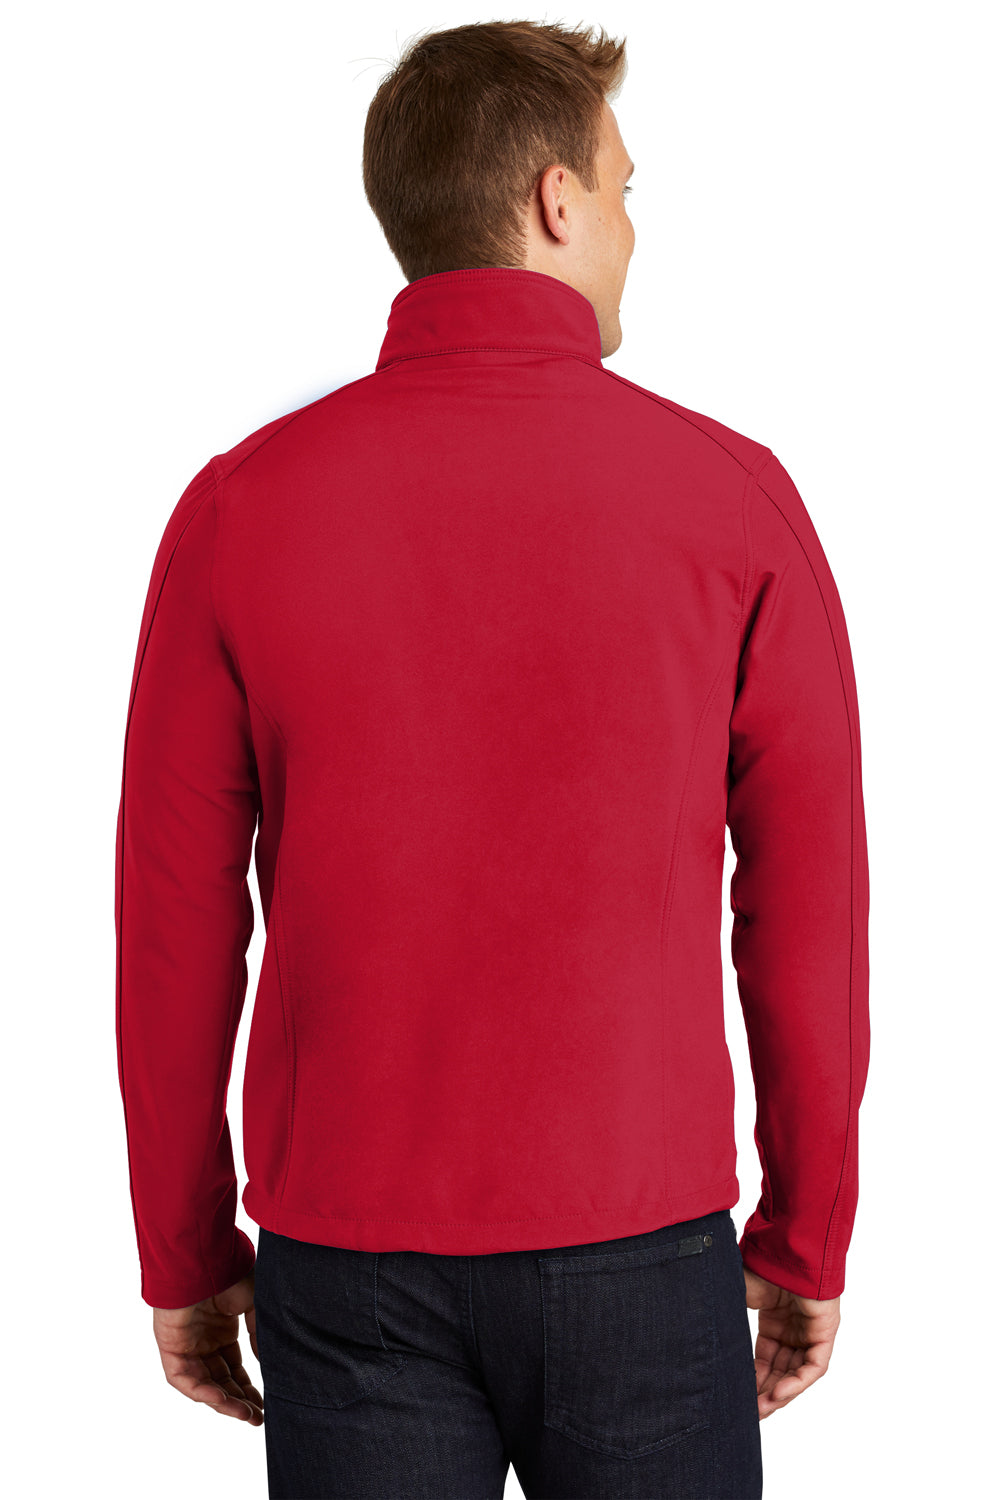 Port Authority J317 Mens Core Wind & Water Resistant Full Zip Jacket Red Back